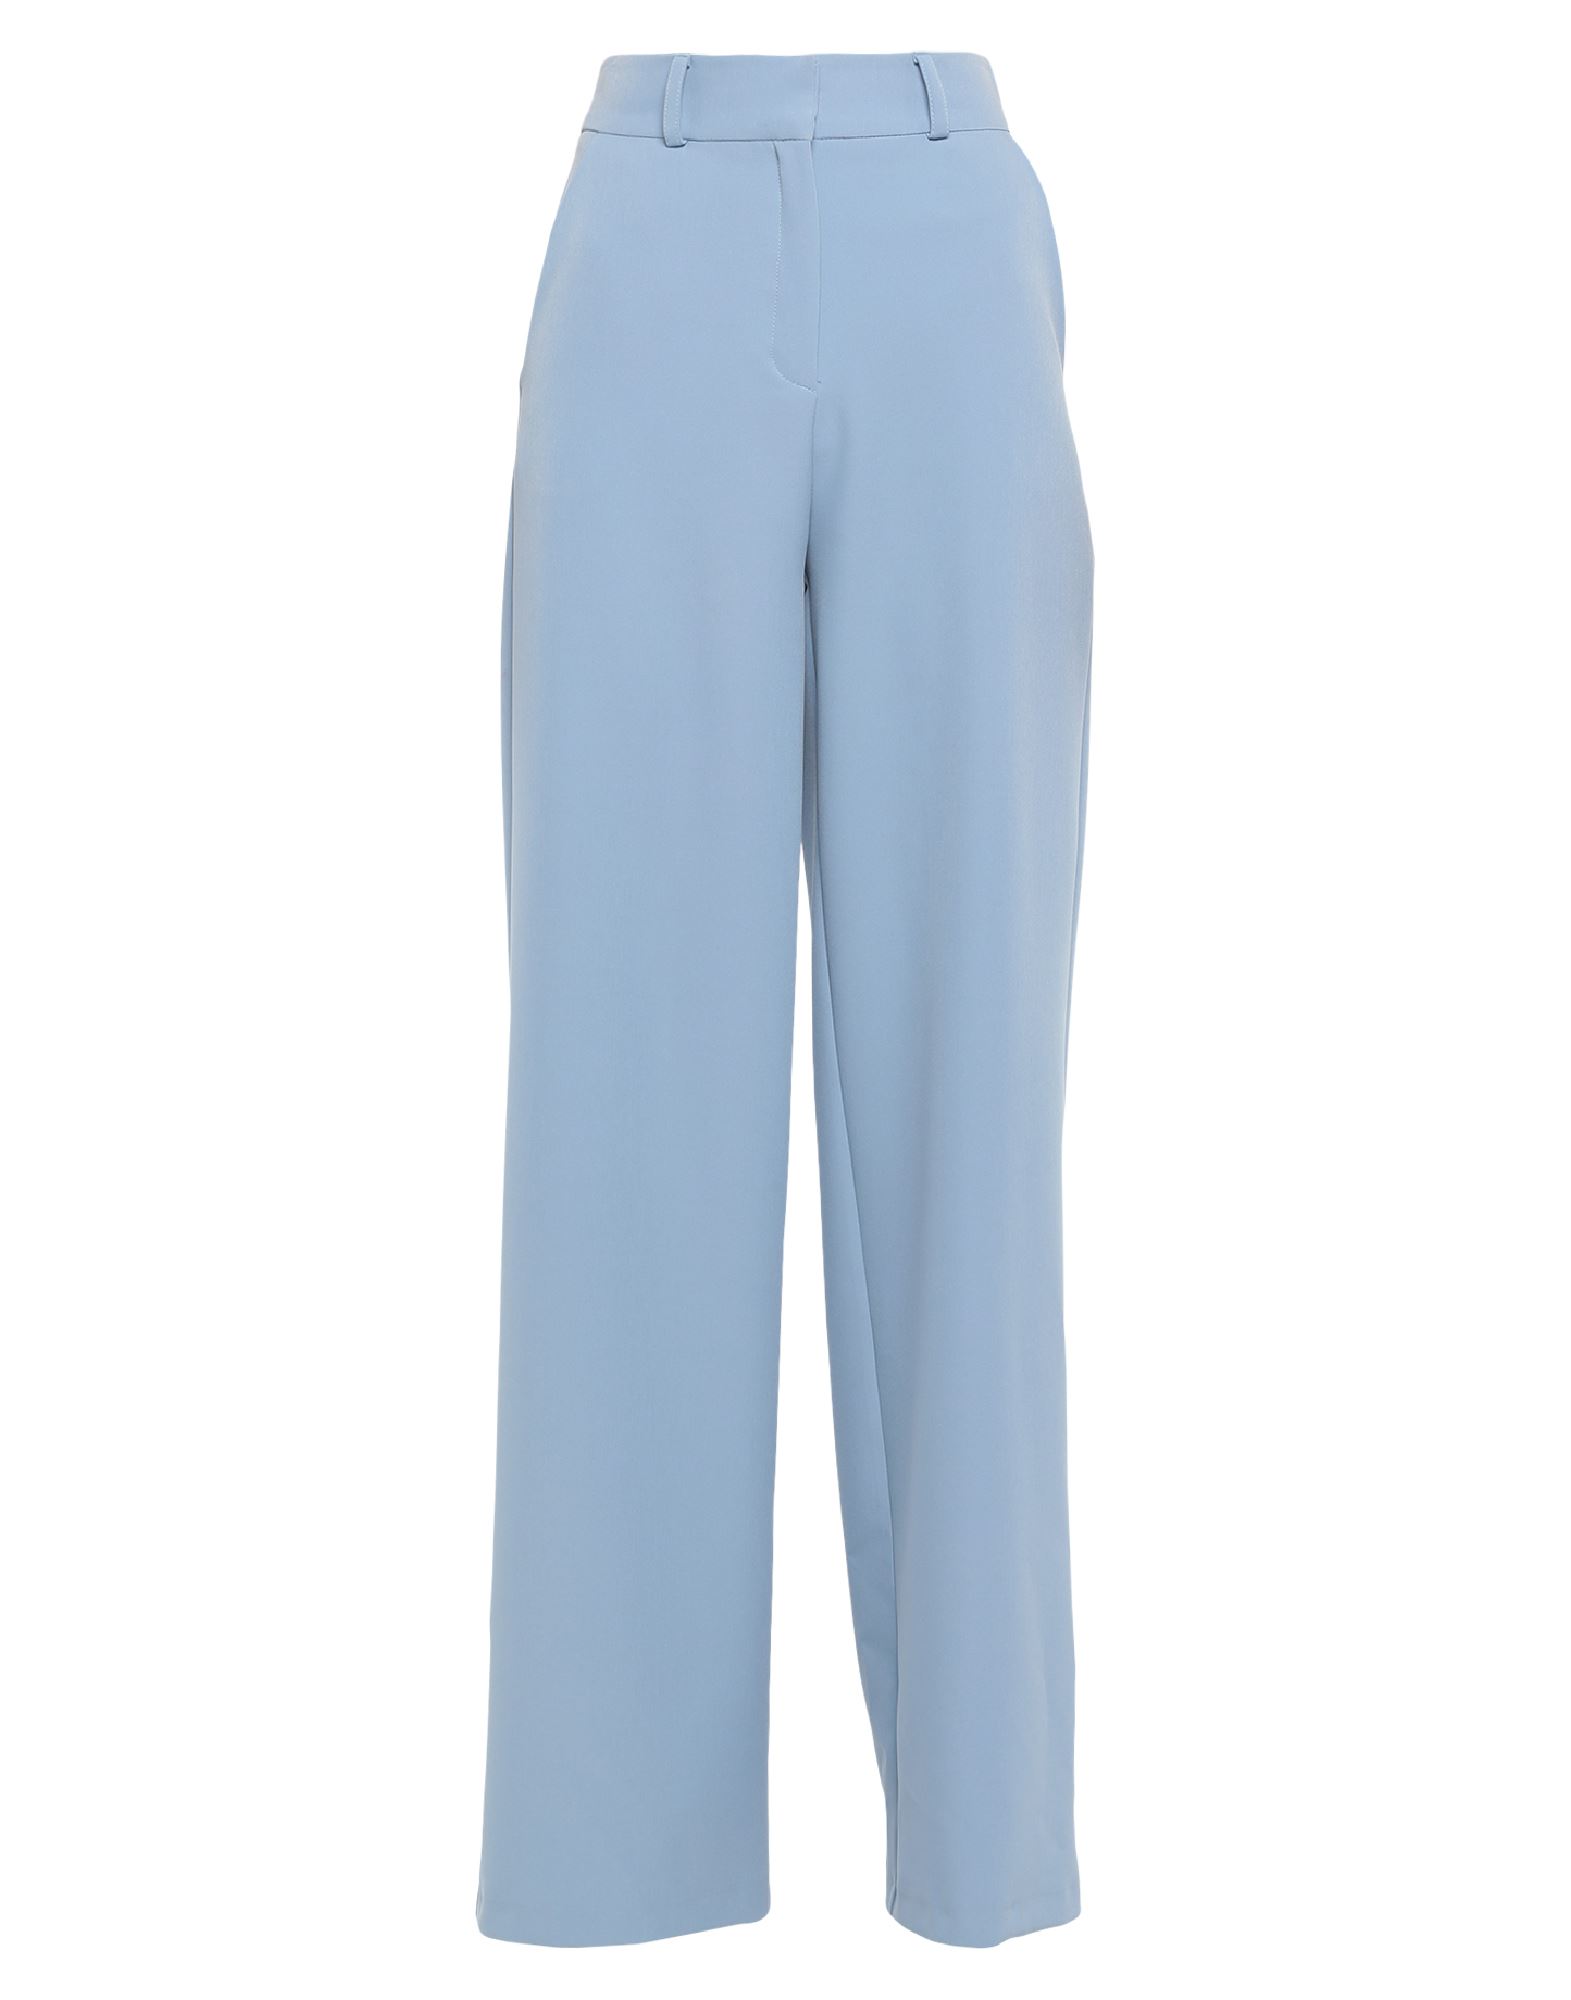 Actualee Pants In Pastel Blue